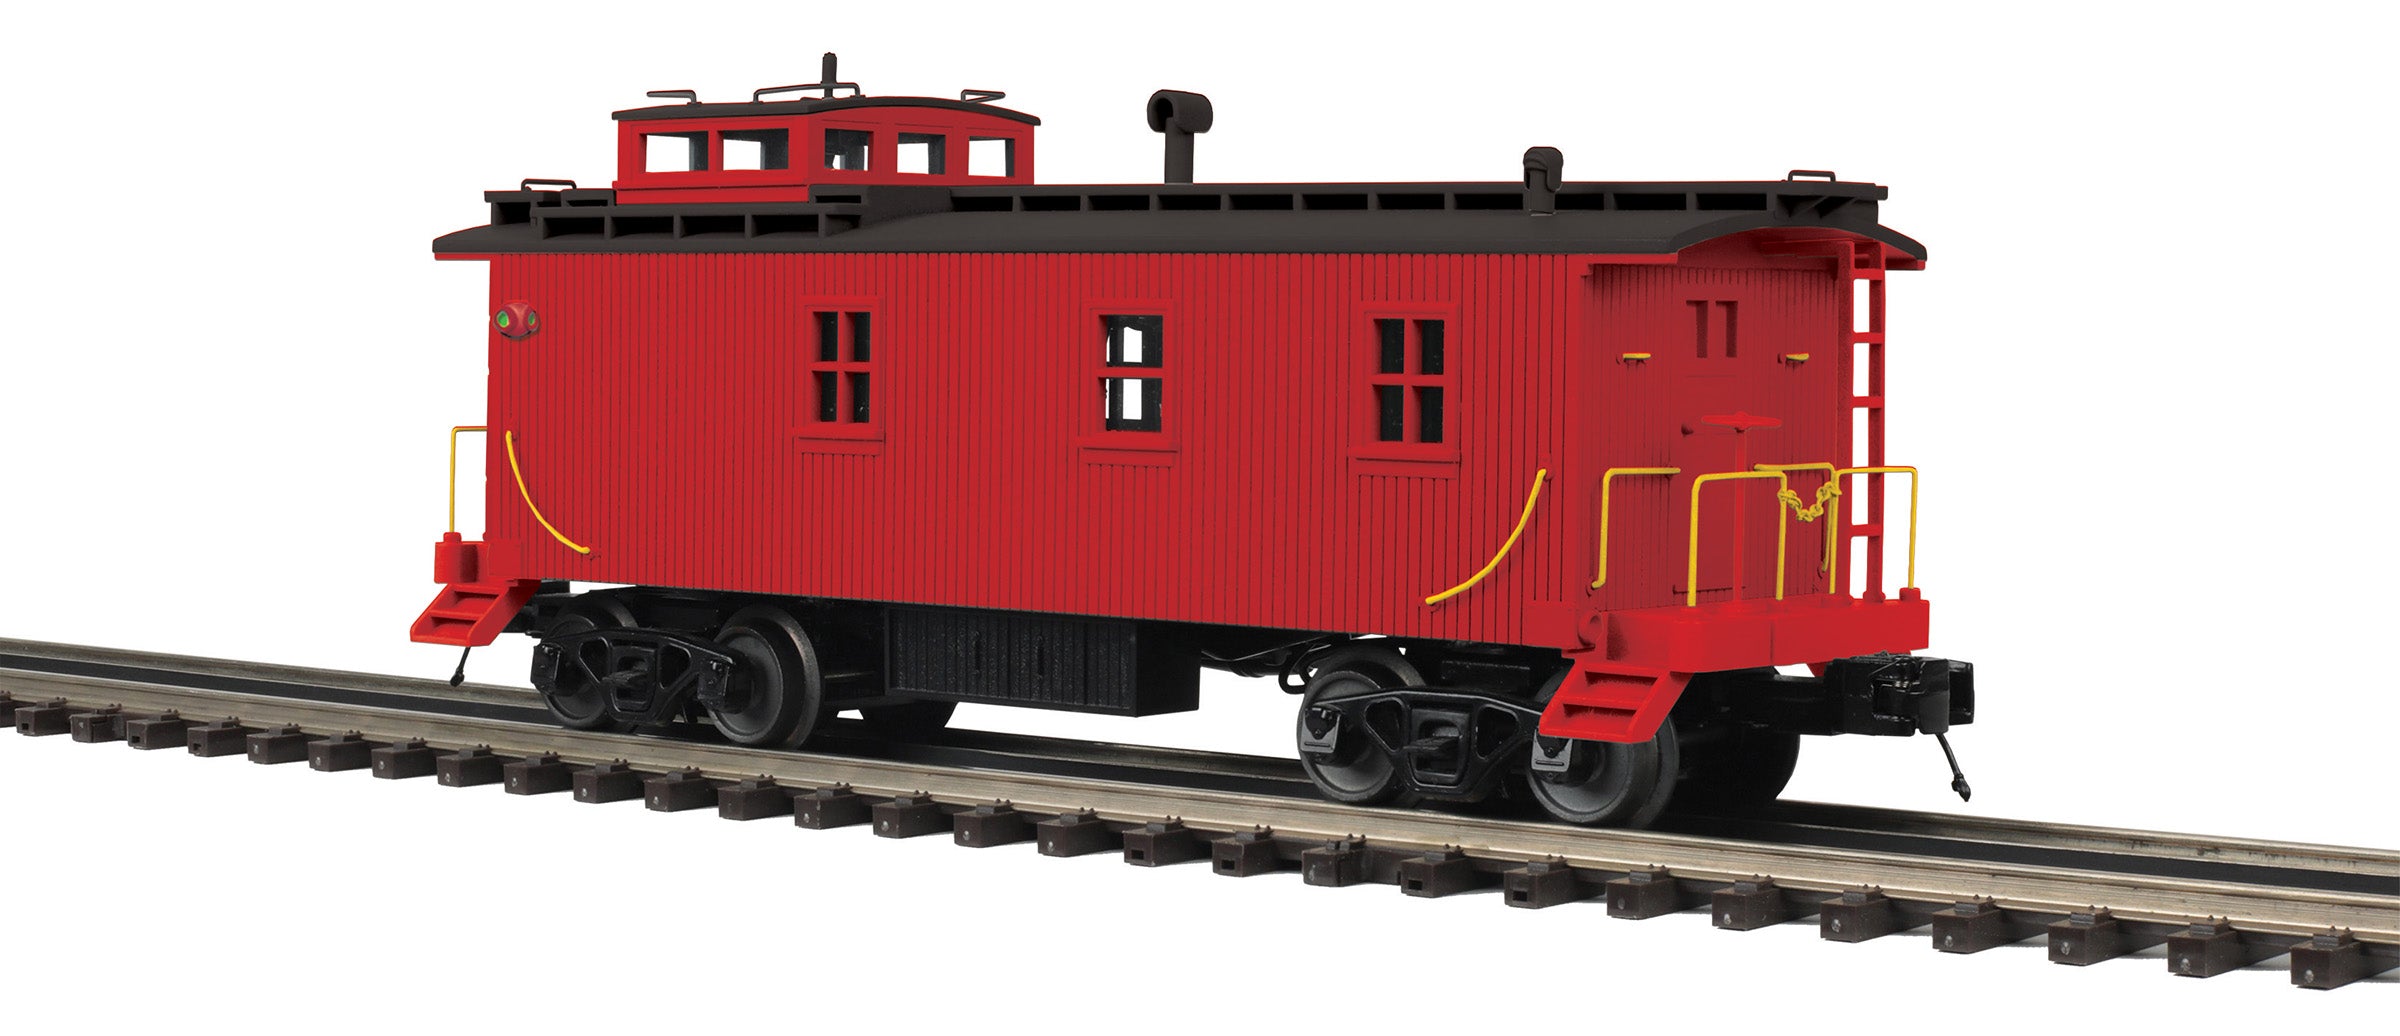 MTH 20-91824 - 35' Woodside Caboose "Unlettered" - Custom Run for MrMuffin'sTrains